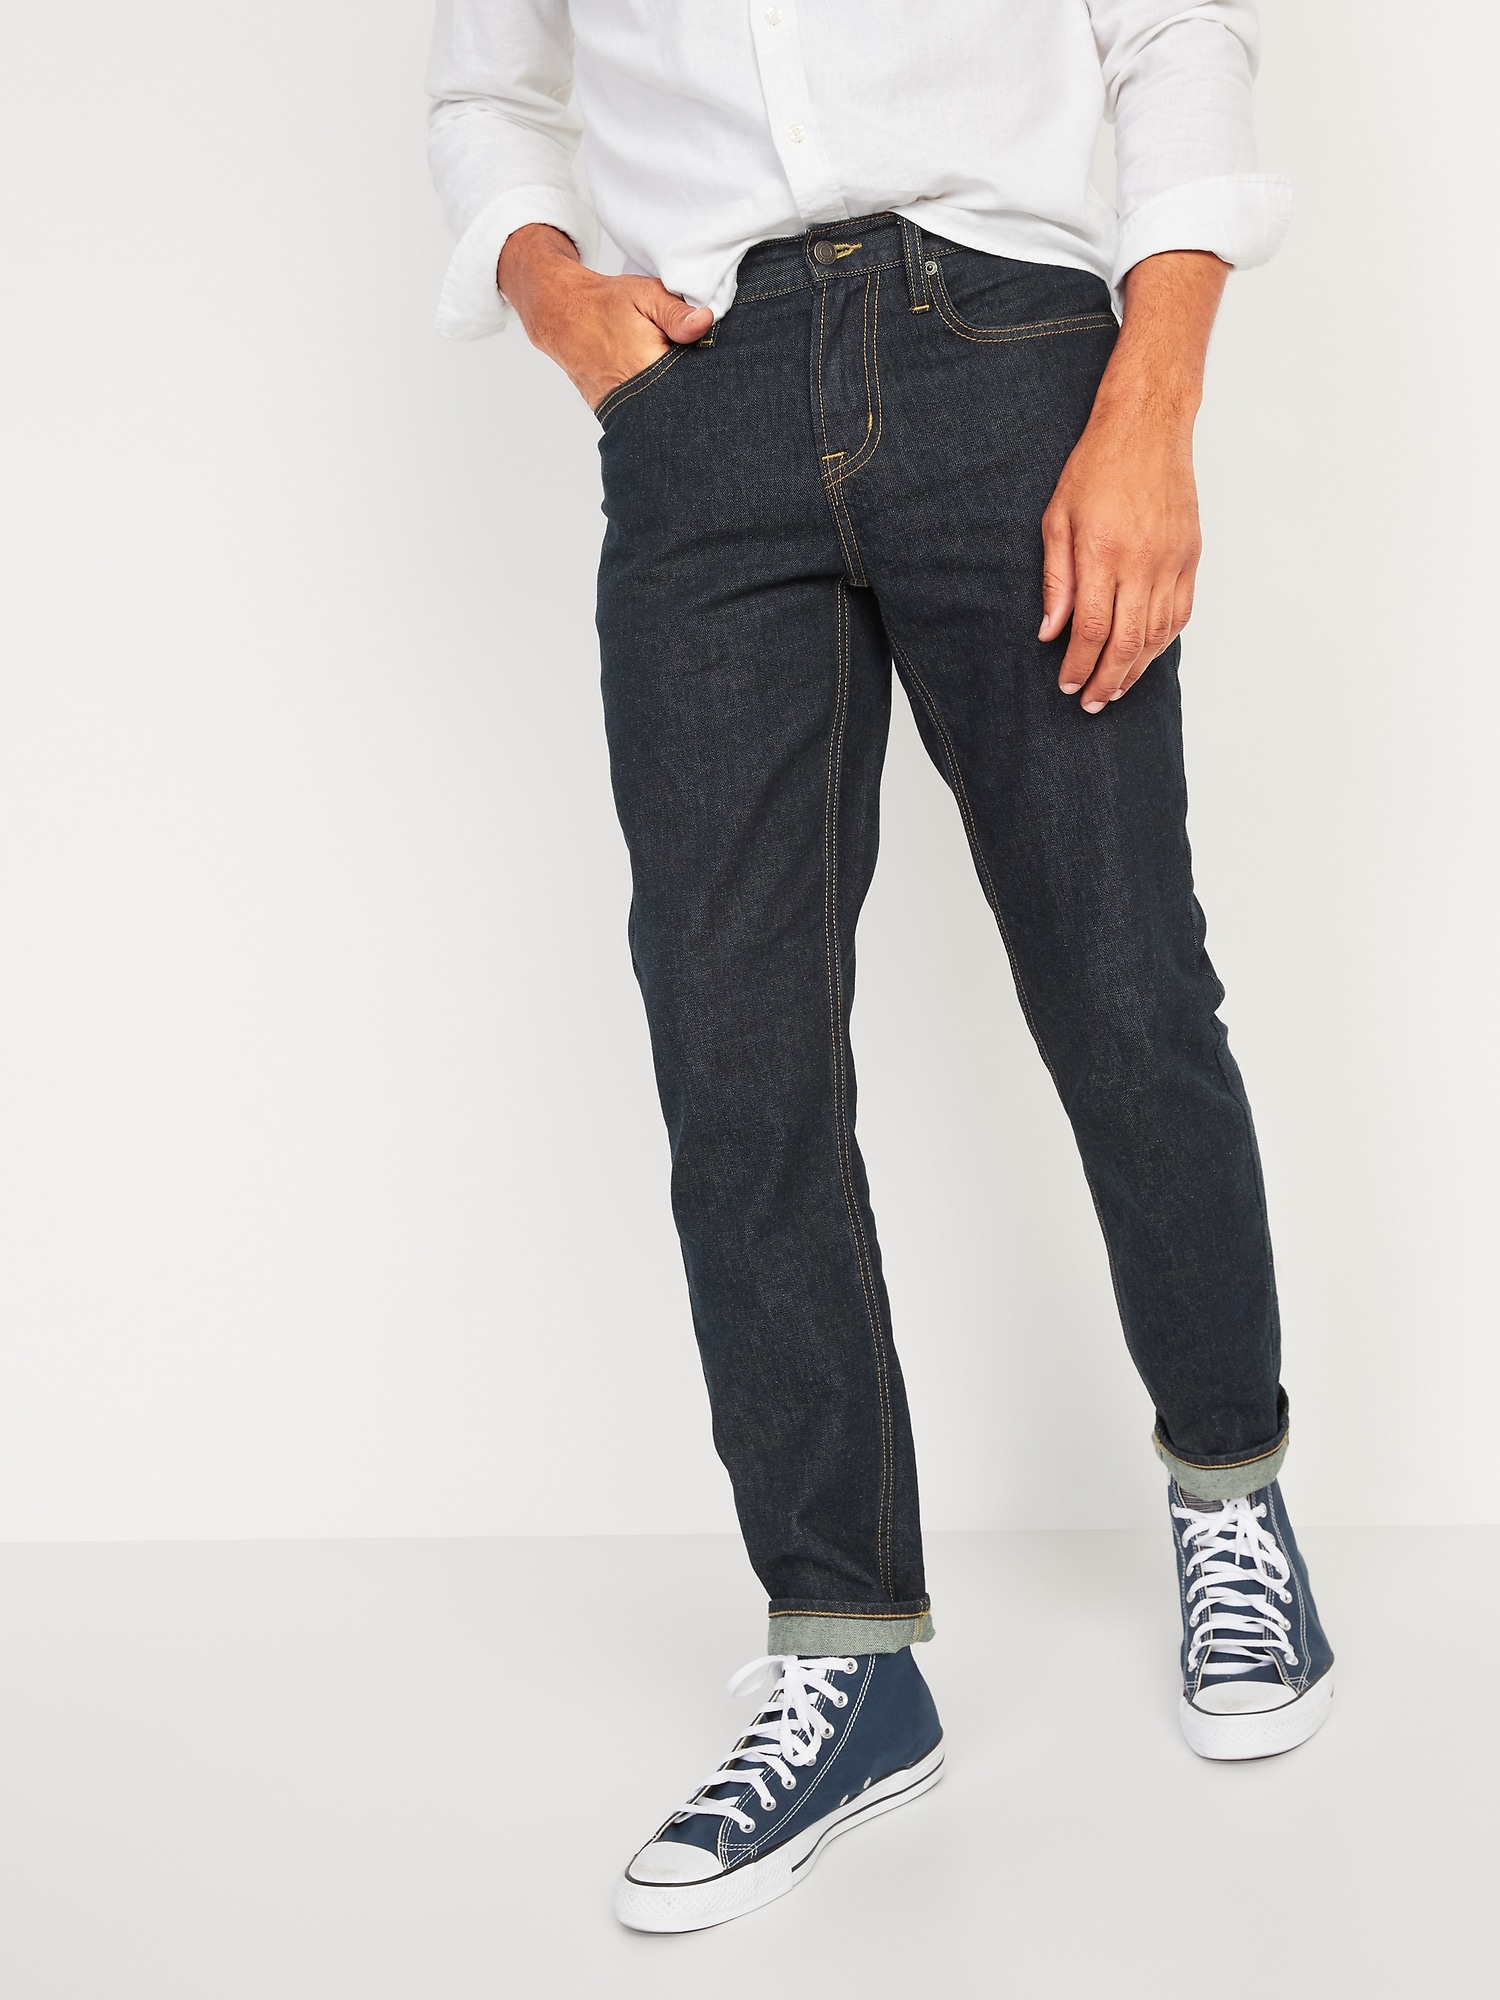 Athletic Taper Cotton Non-Stretch Jeans for Men | Old Navy